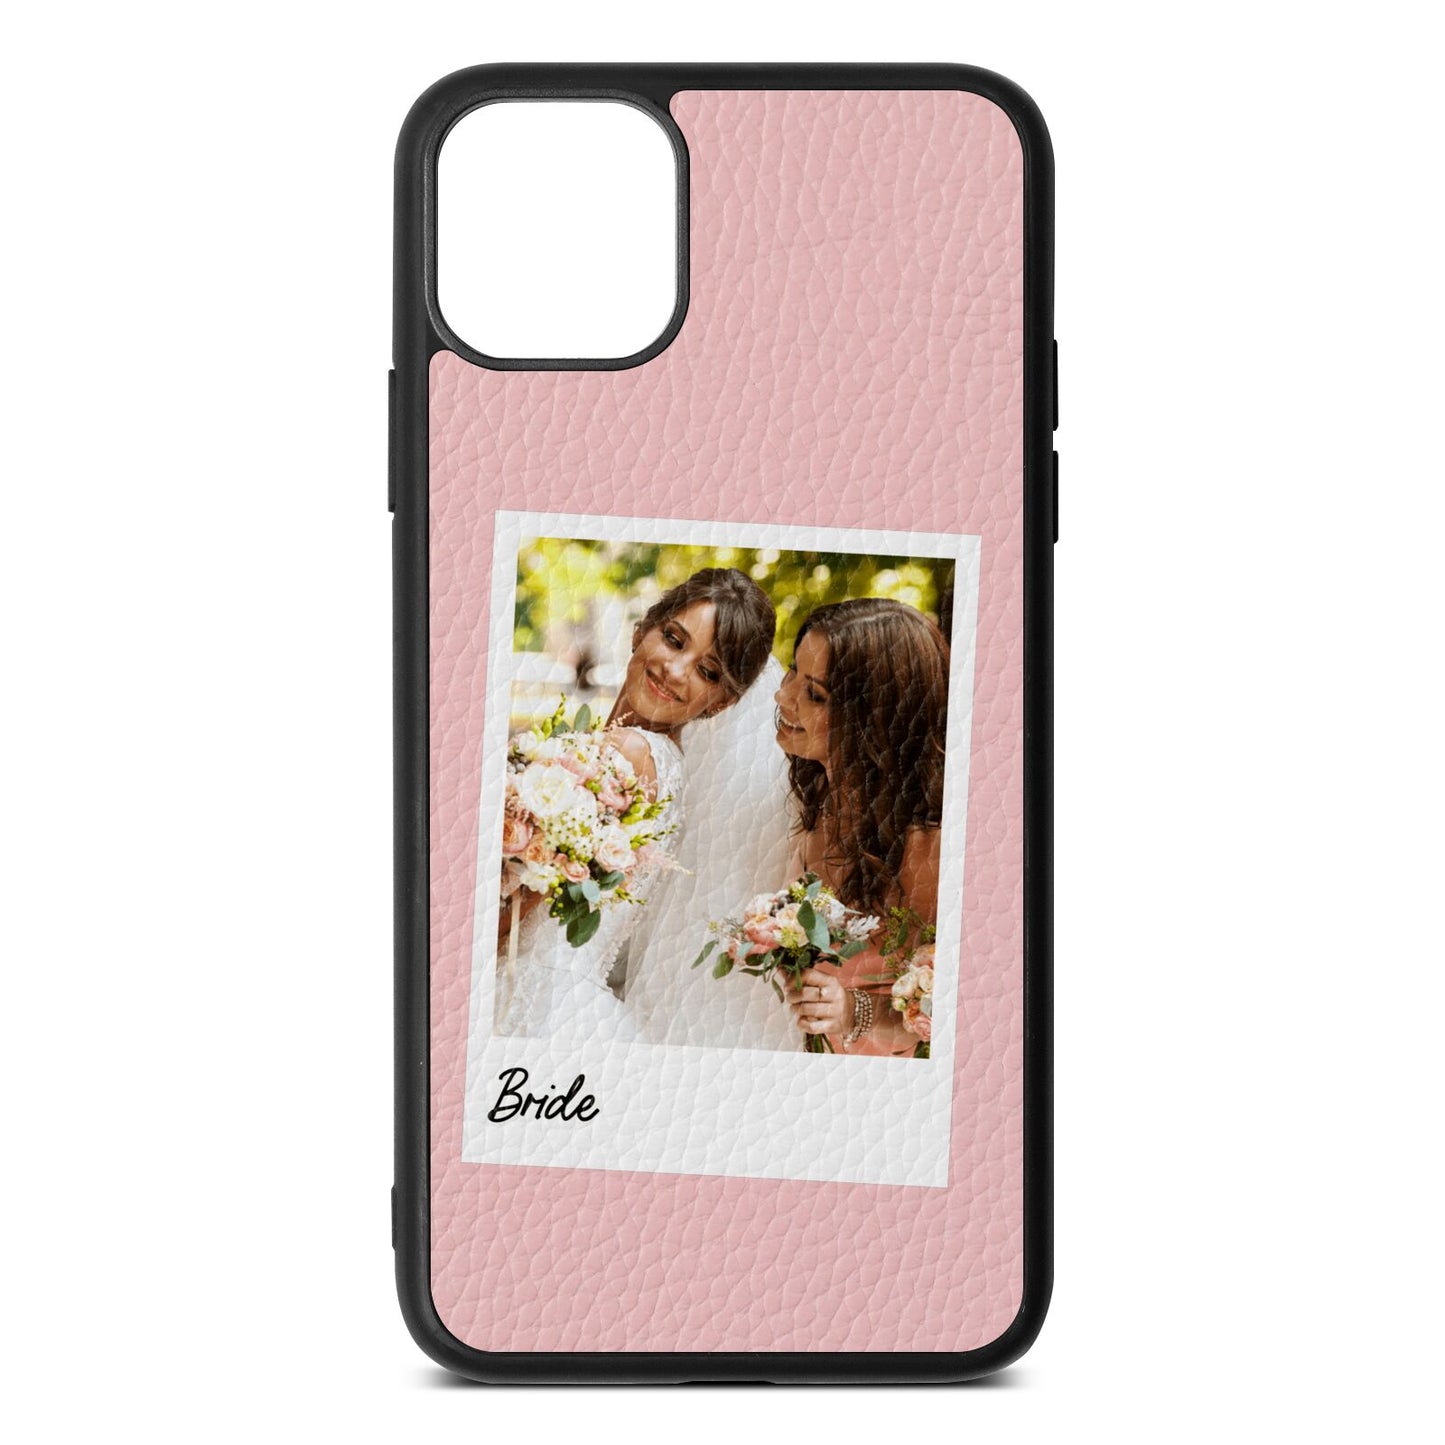 Bridal Photo Pink Pebble Leather iPhone 11 Pro Max Case